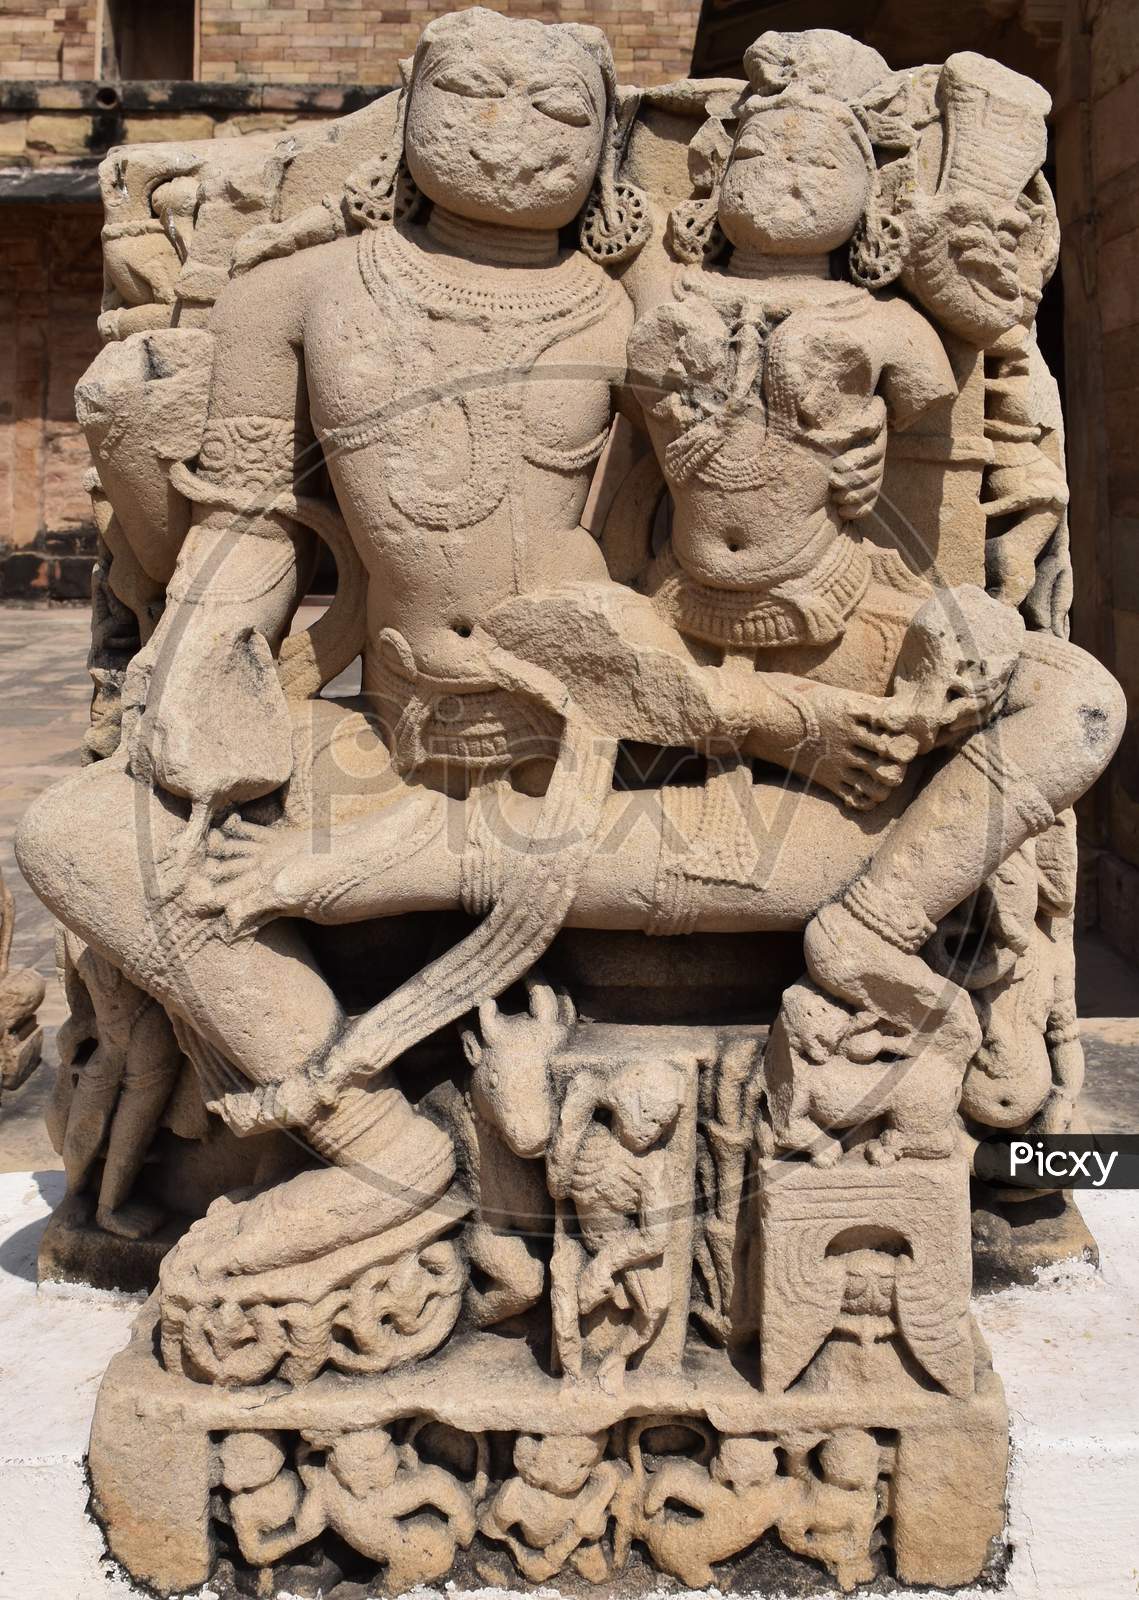 Gwalior, Madhya Pradesh/India - March 15, 2020 : Sculpture Of Shiva-Parvati Built In 12-13Th Century A.D.